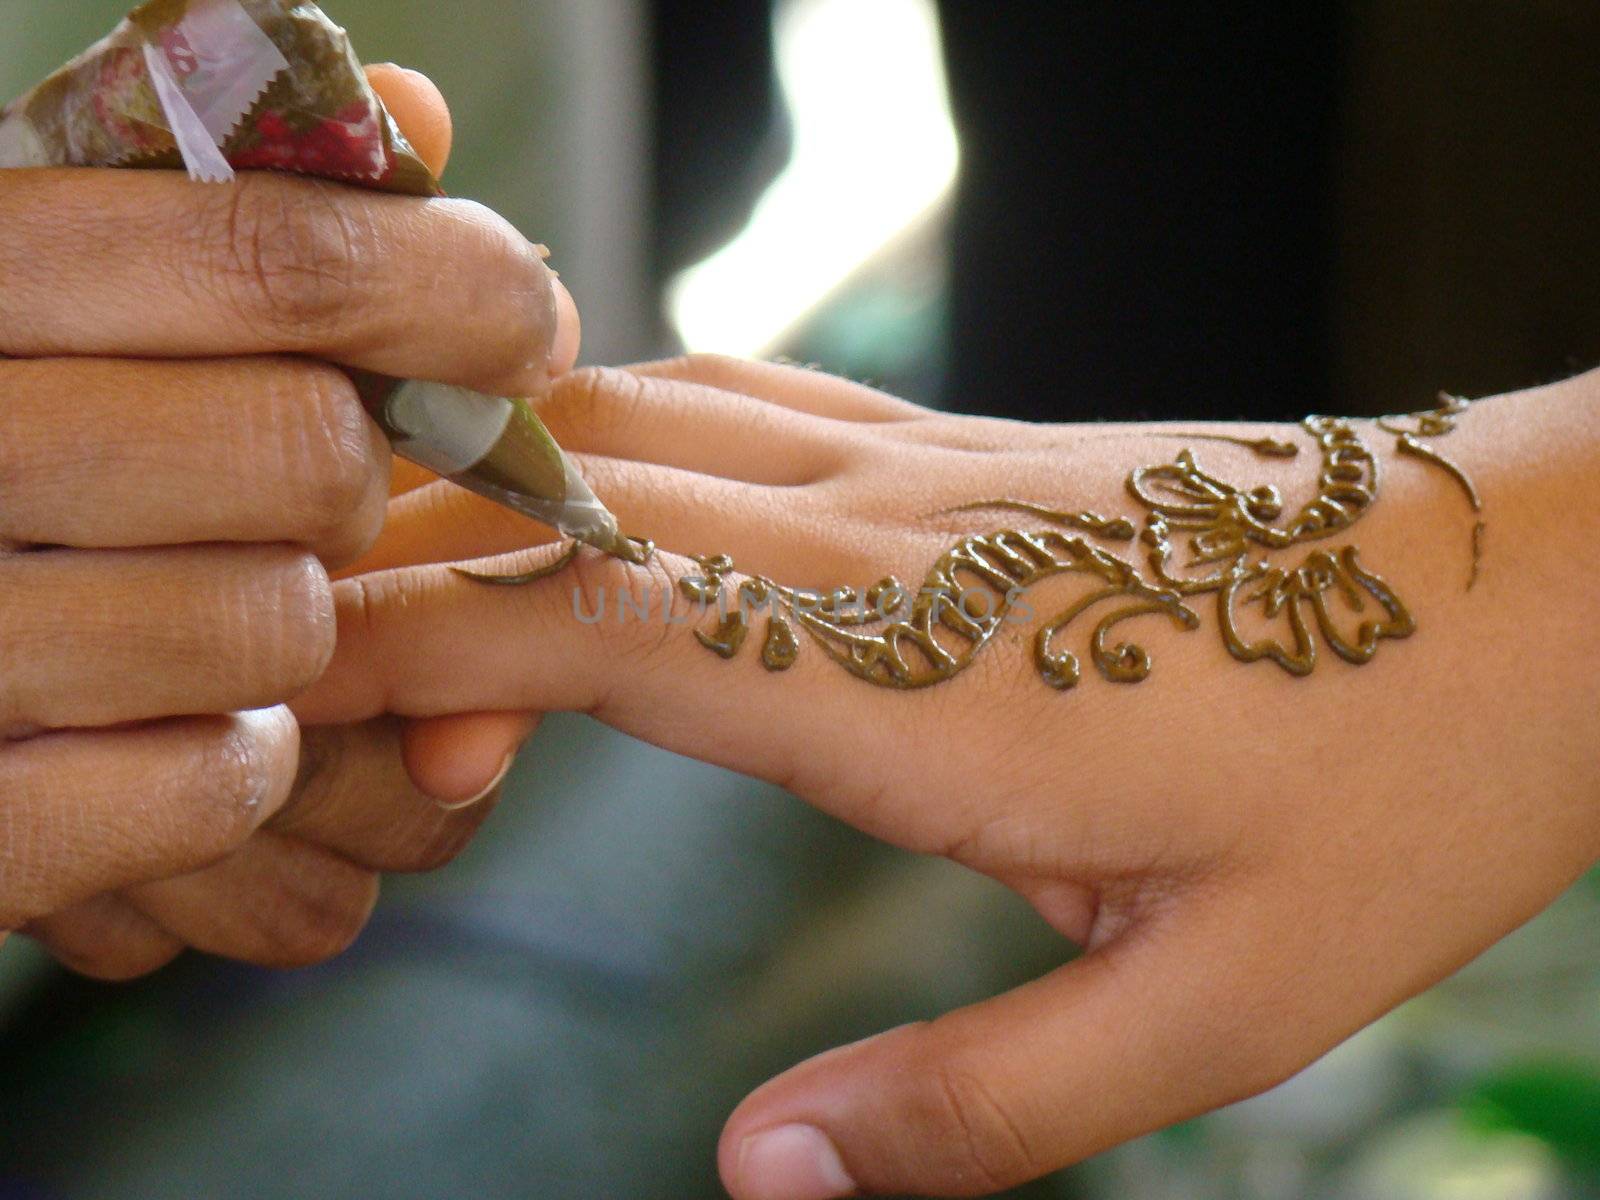 appling henna tattoo to hands by hicster